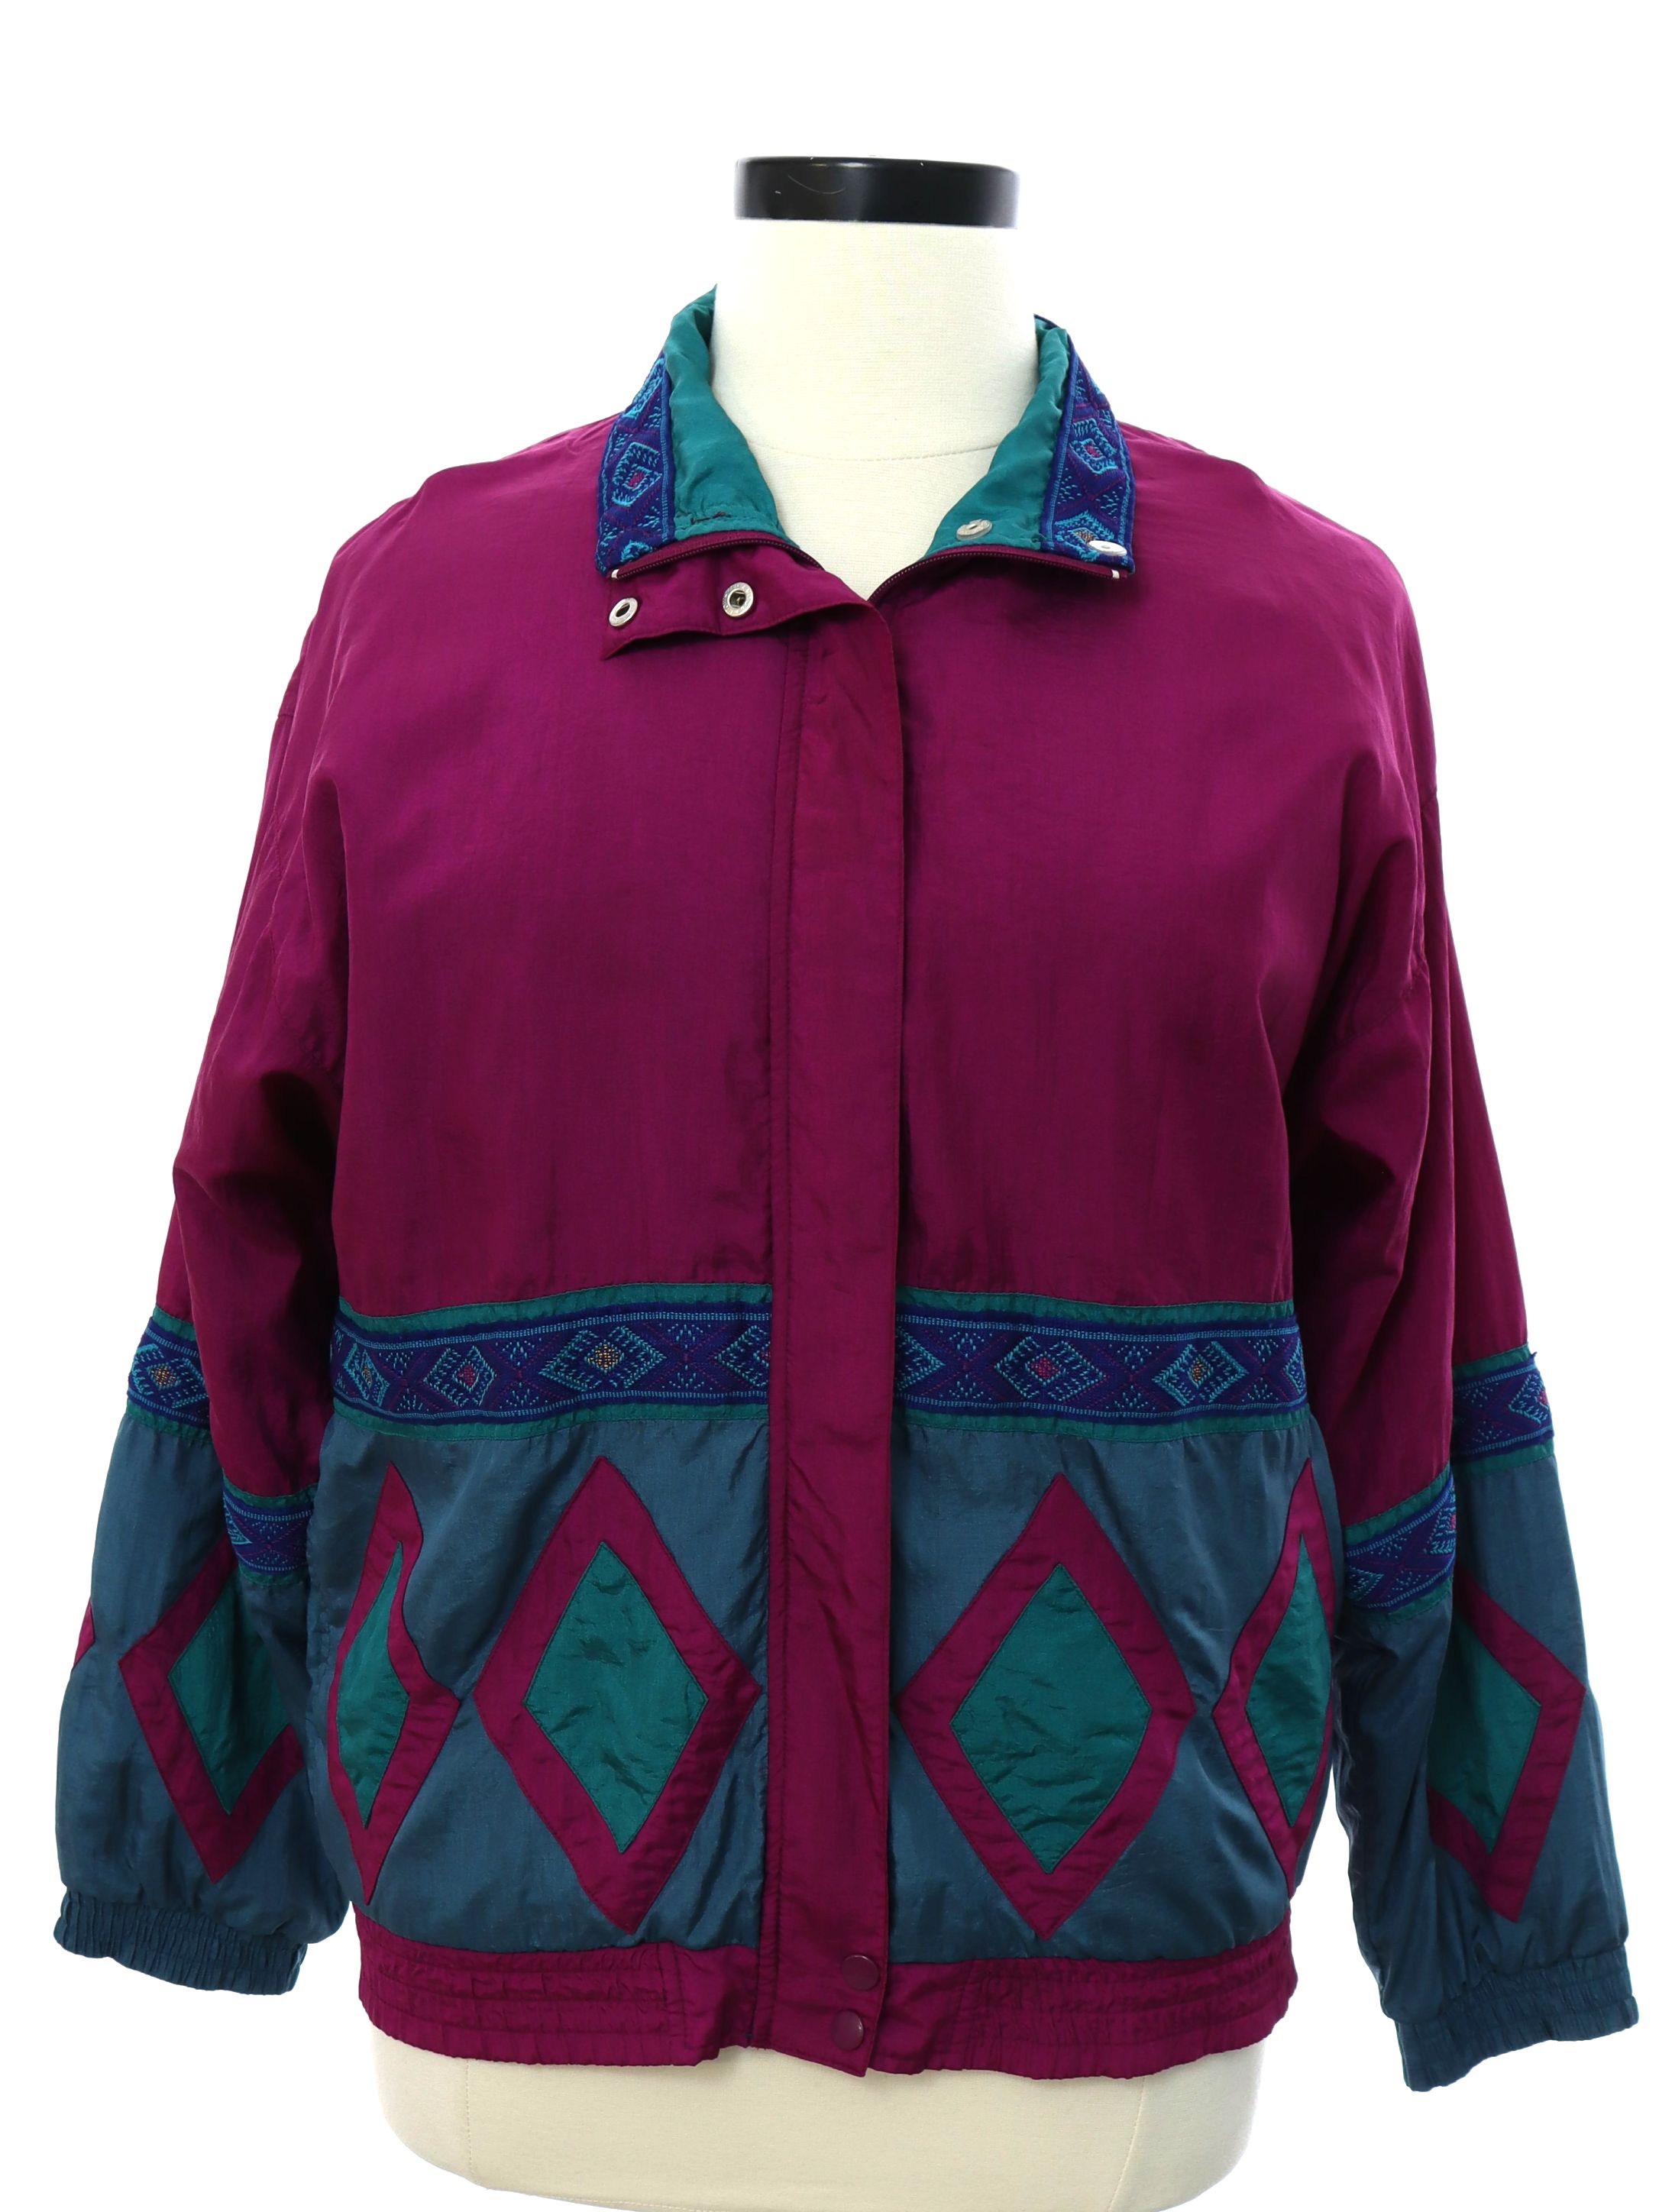 Lavon 1990s Vintage Jacket: 90s -Lavon- Womens magenta and teal color ...